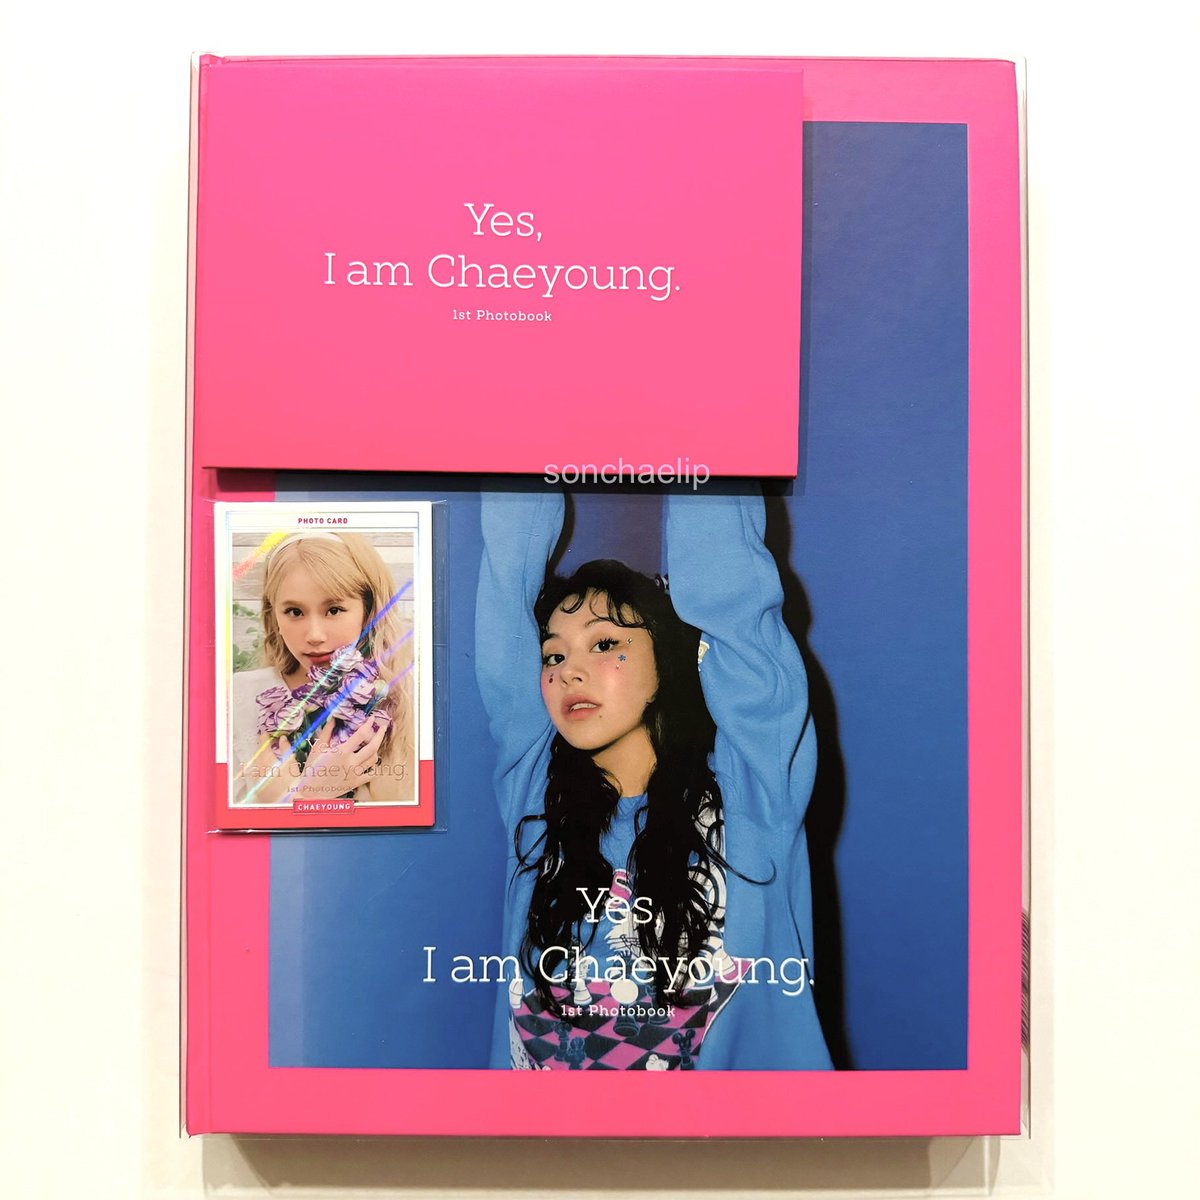 #TWICE / #CHAEYOUNG birthday giveaway! 🍓🎂 - one winner will get a pink copy of YIAC + photocard and postcard set - rt & like this tweet to enter - USA only - ends wed 4/24 @ 11:59pm pst #HappyCHAEYOUNGday #딸기제철에_태어난_딸기곤듀 #HAPPYCHAEBERRYDAY